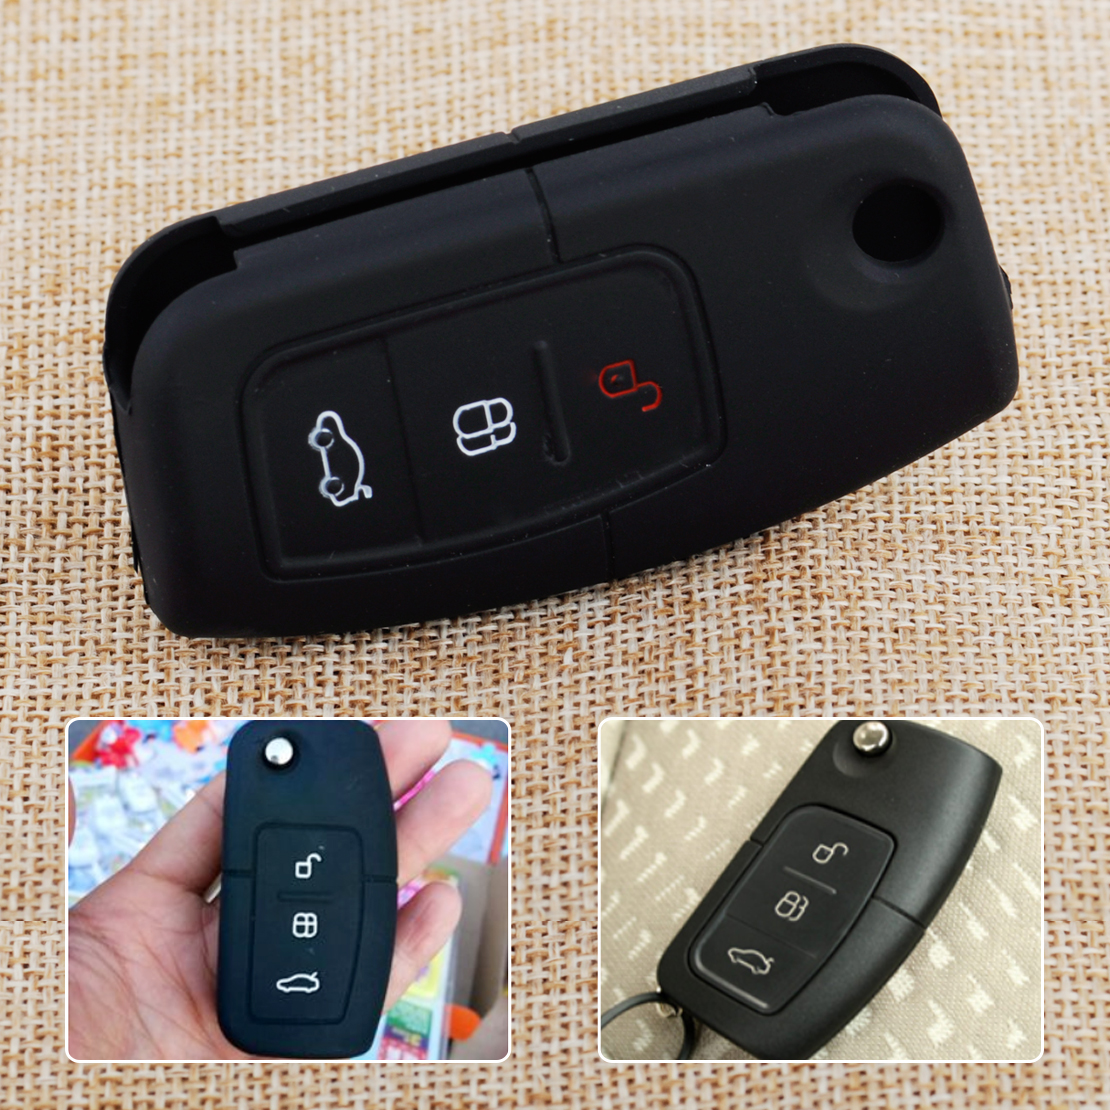 Citall 3 Button Afstandsbediening Sleutelhanger Case Shell Silicone Cover Voor Ford Focus MK2 Fiesta Mondeo Kuga C-Max S-Max Flip-Open Sleutel Alleen